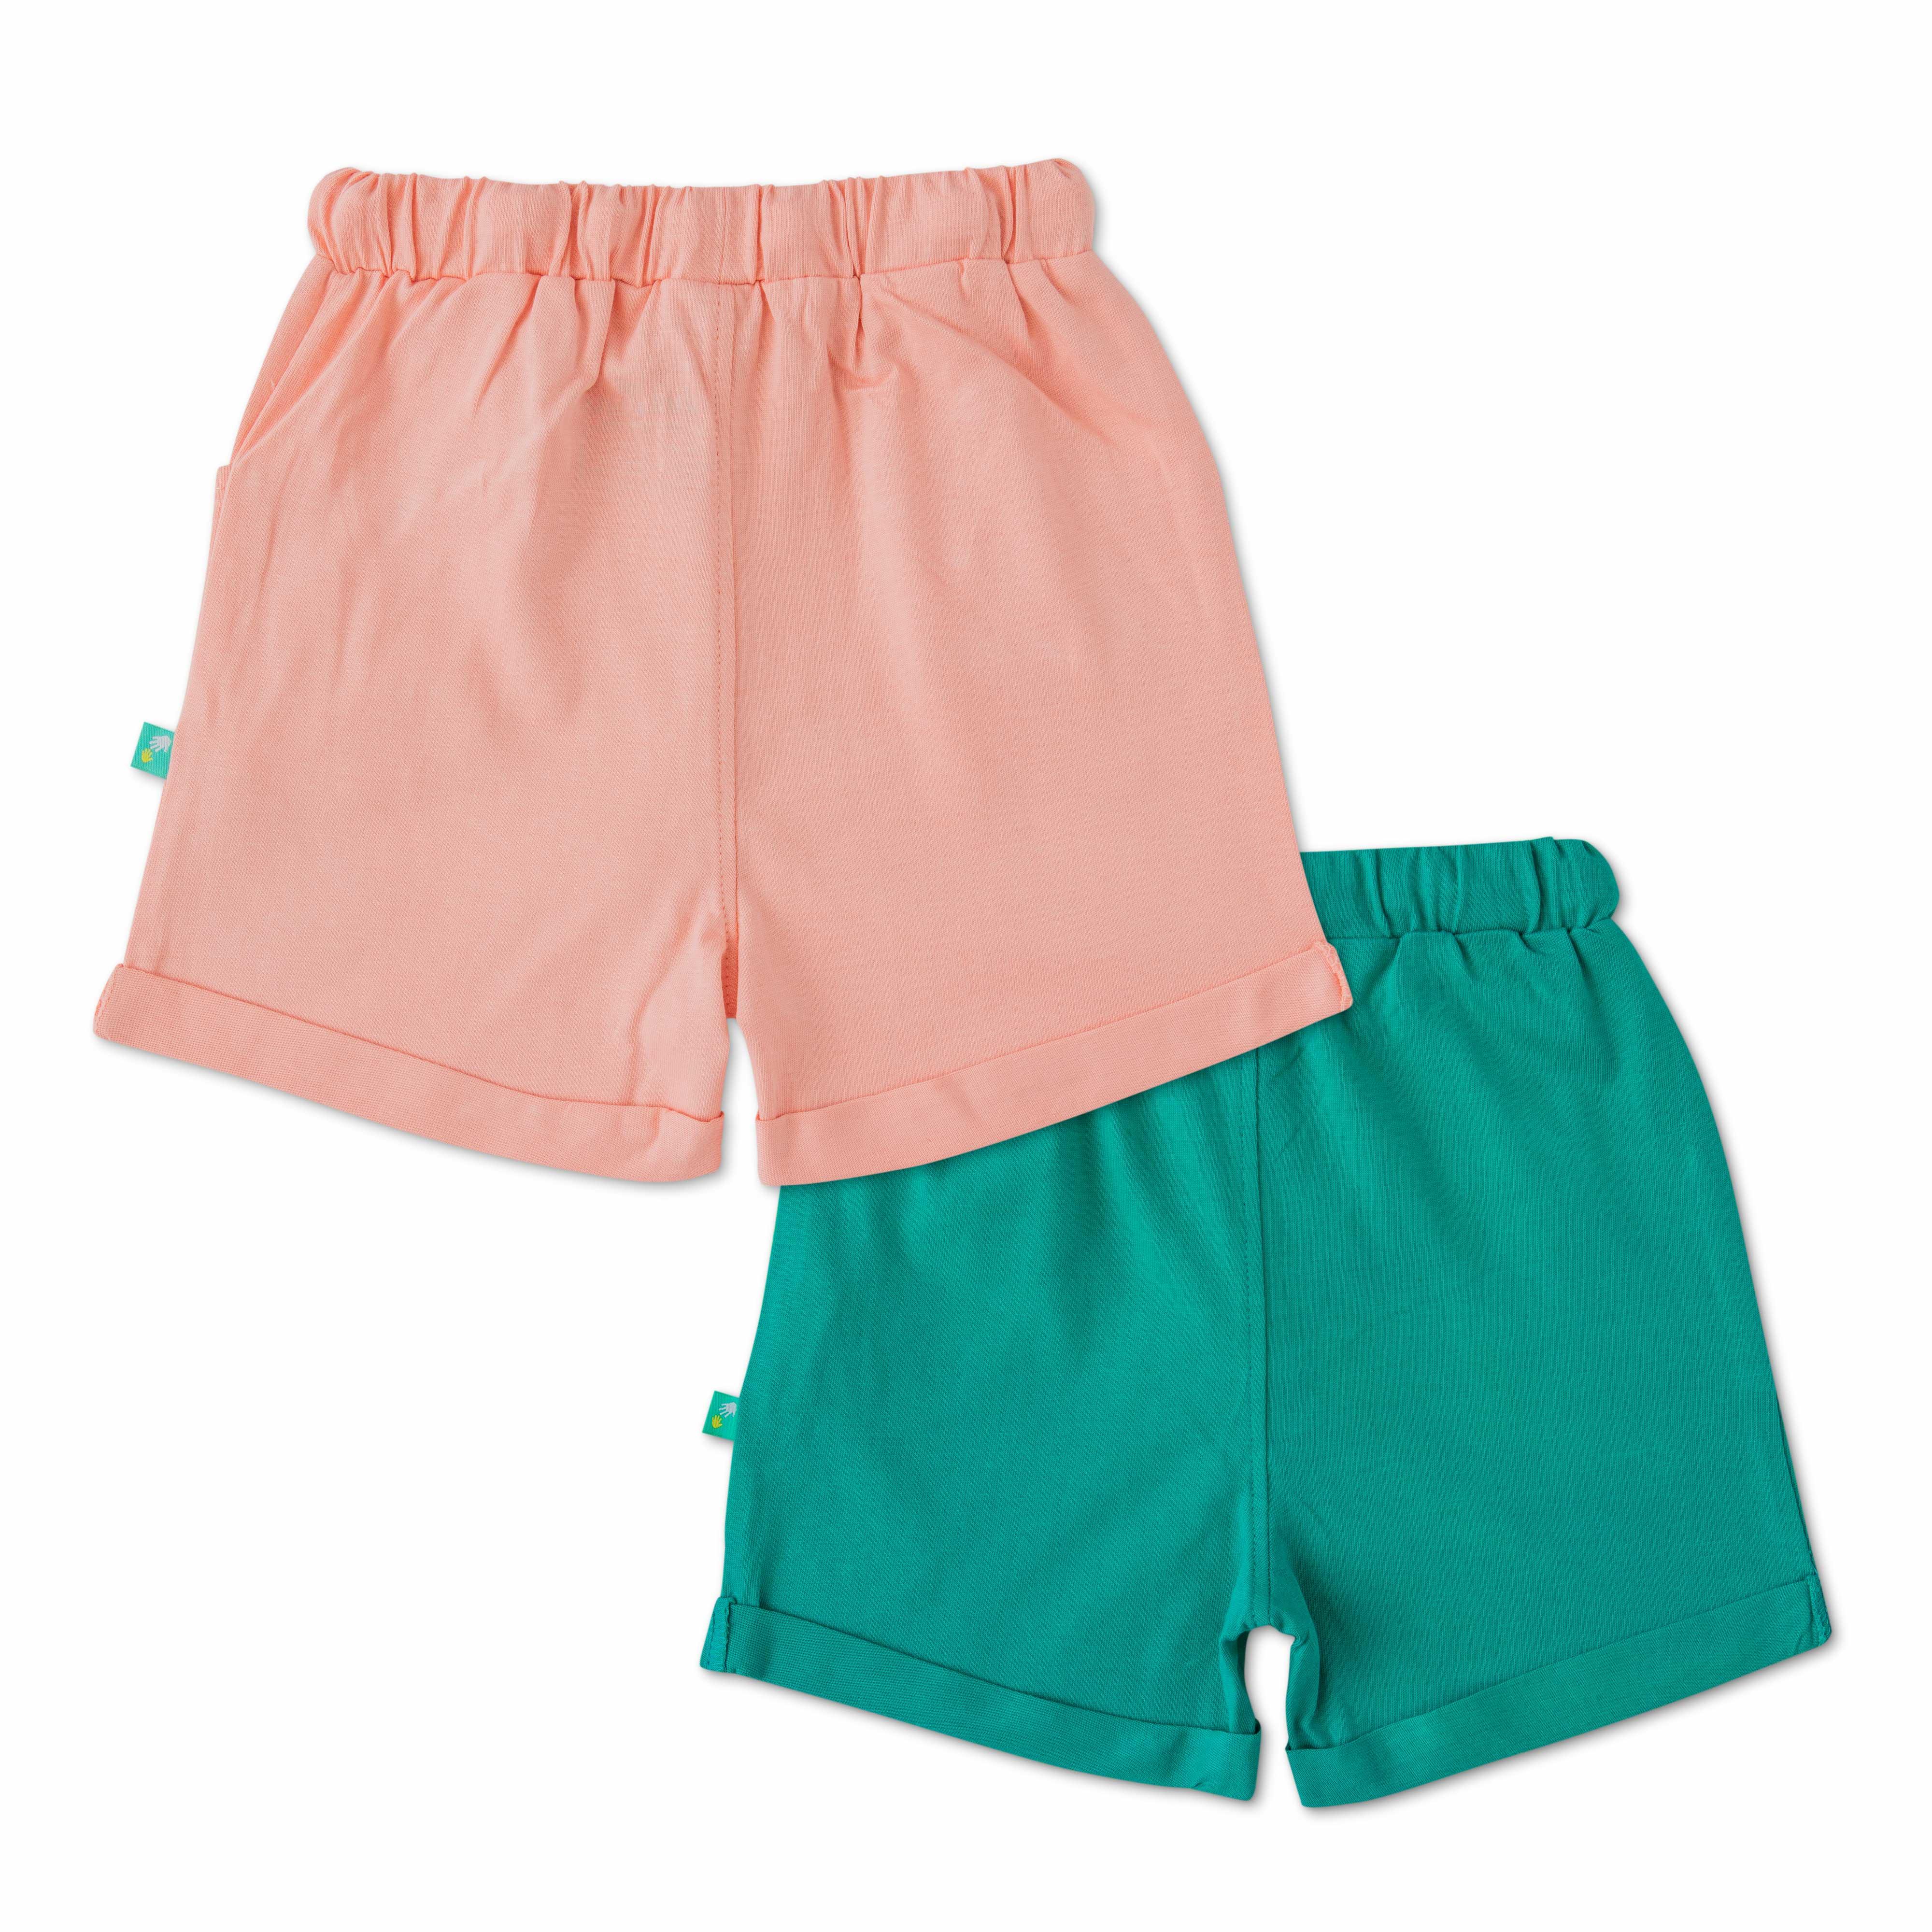 Toddlers Girls Solid Shorts Pack of 2 - Juscubs